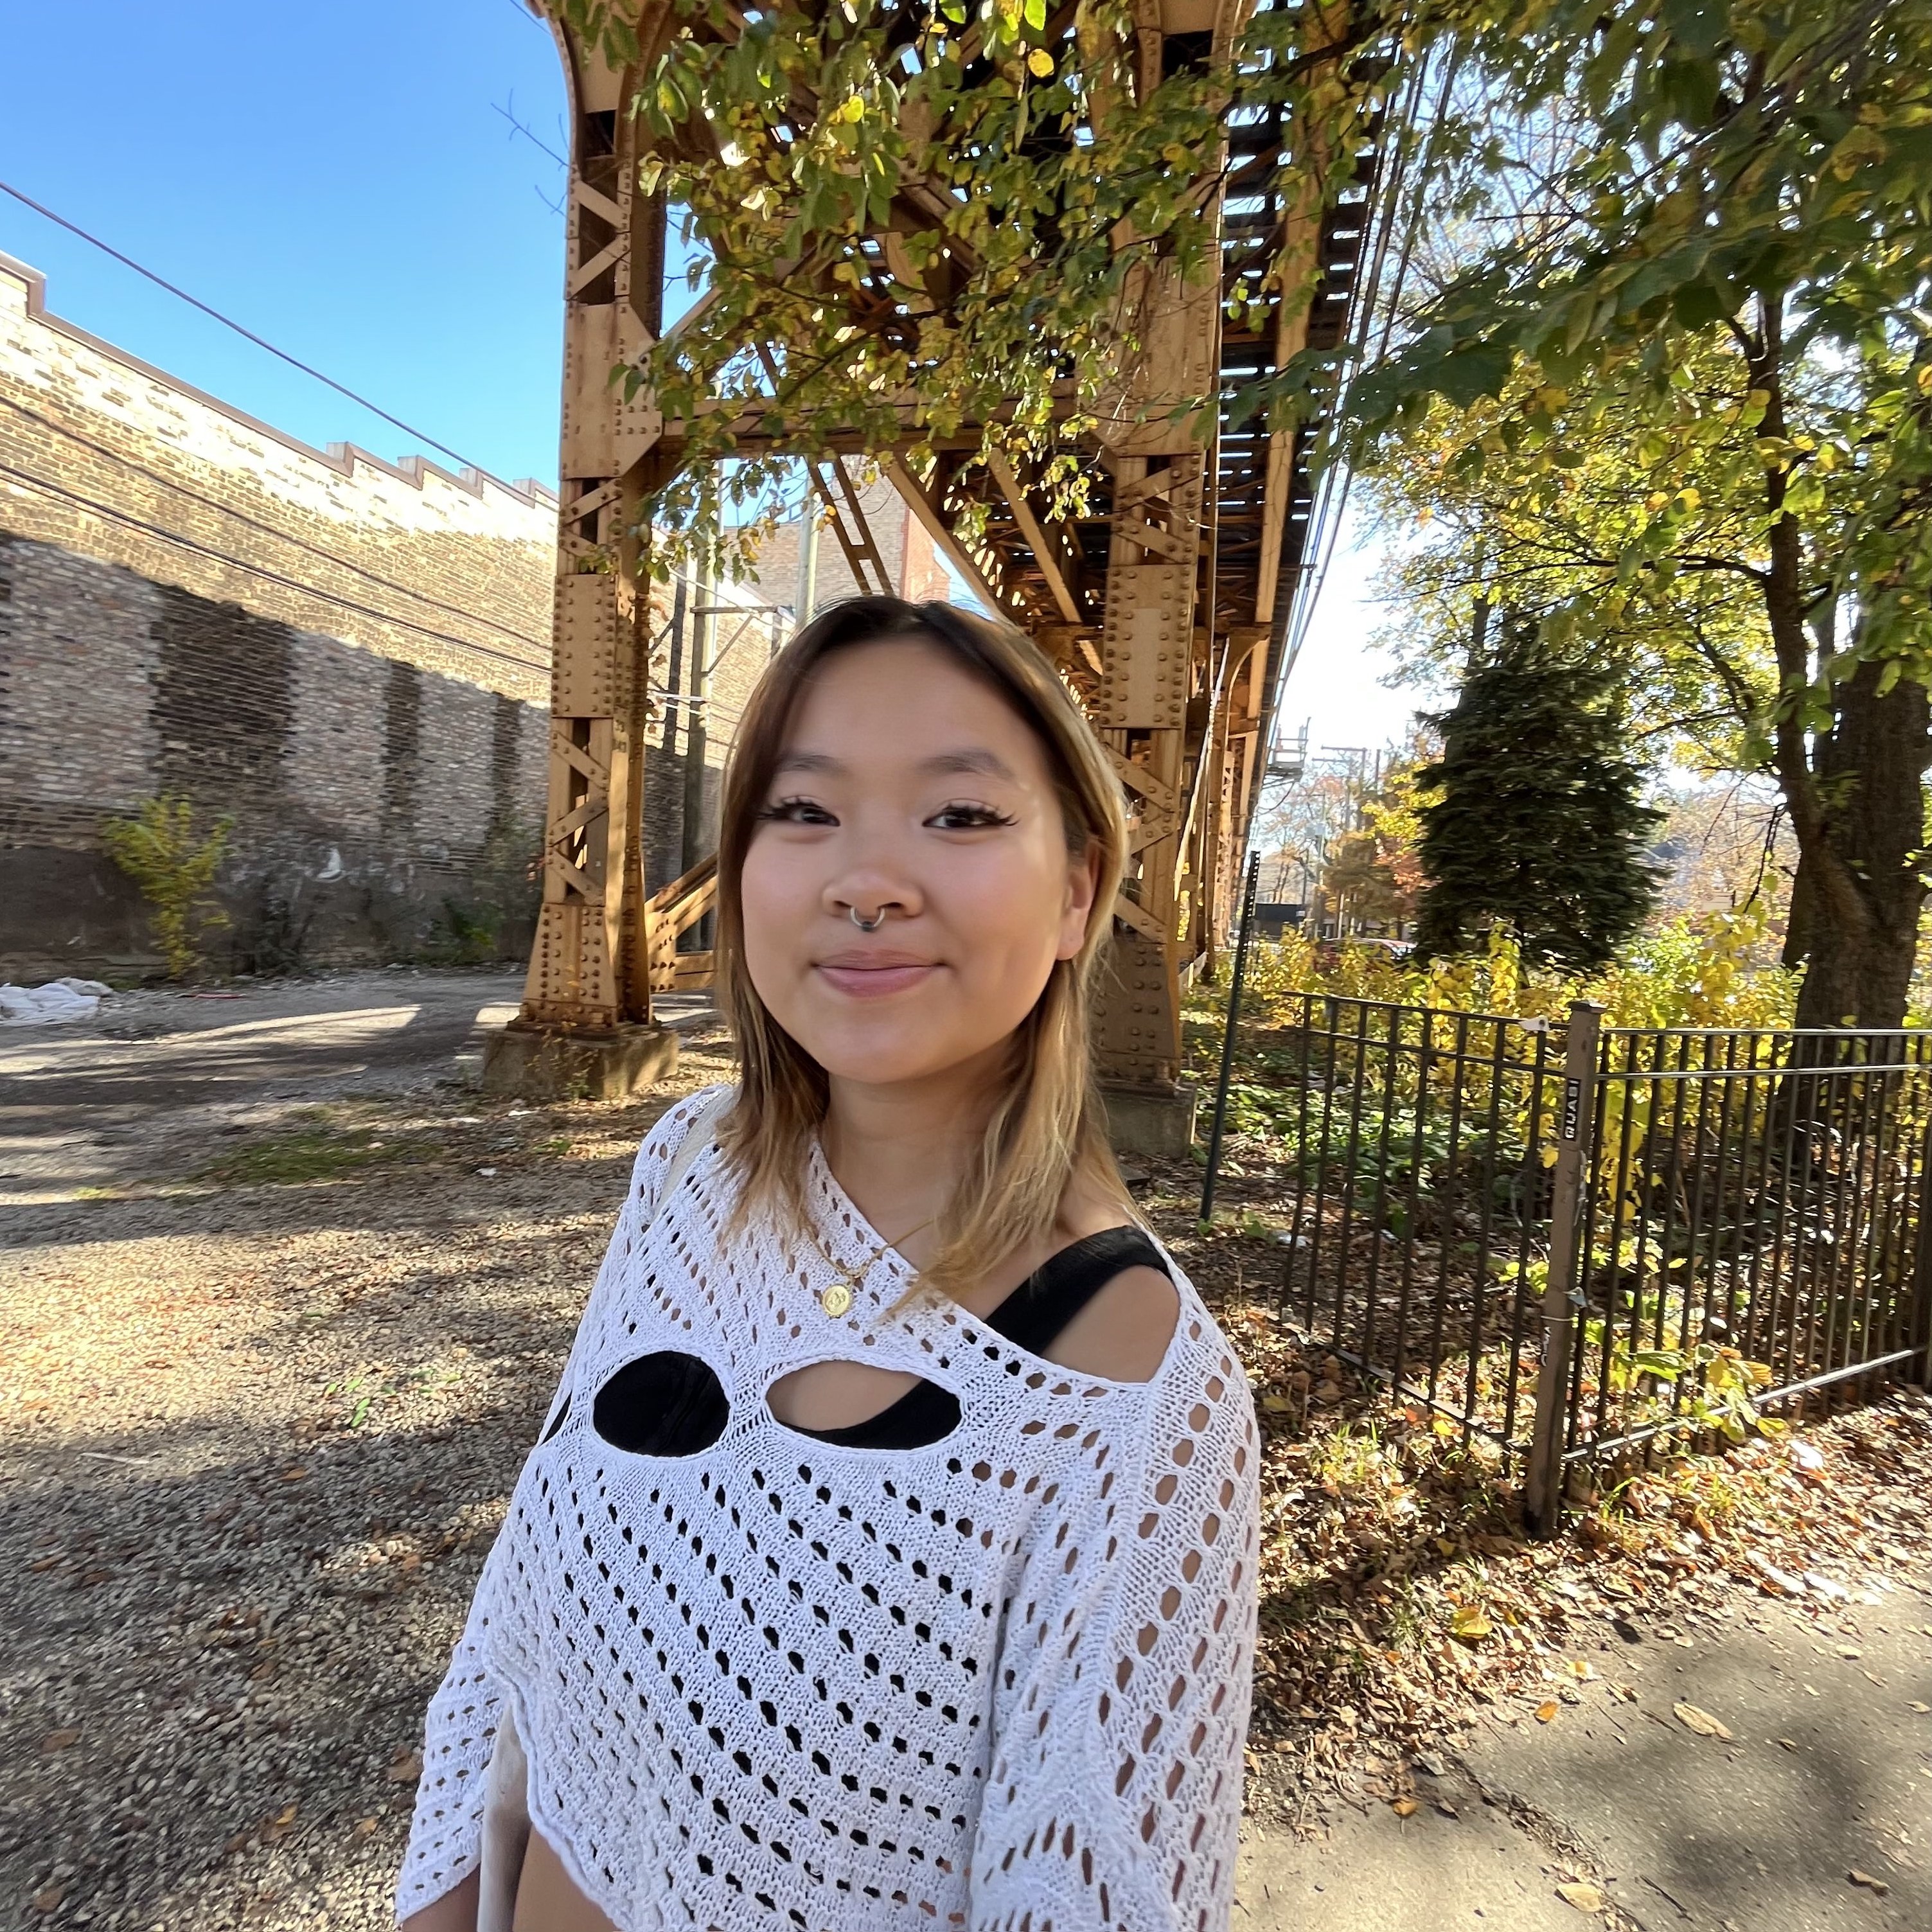 Annie Ho is a sophomore studying Environmental Engineering at Northwestern University. With an interest in sustainability and design, ESW was the perfect place to work on a hands-on project and is excited to join the Biology Team. She hopes to pursue a future in urban sustainability and planning to help keep our cities clean.LINKEDINLINKhttps://www.linkedin.com/in/annie-ho-254138242/